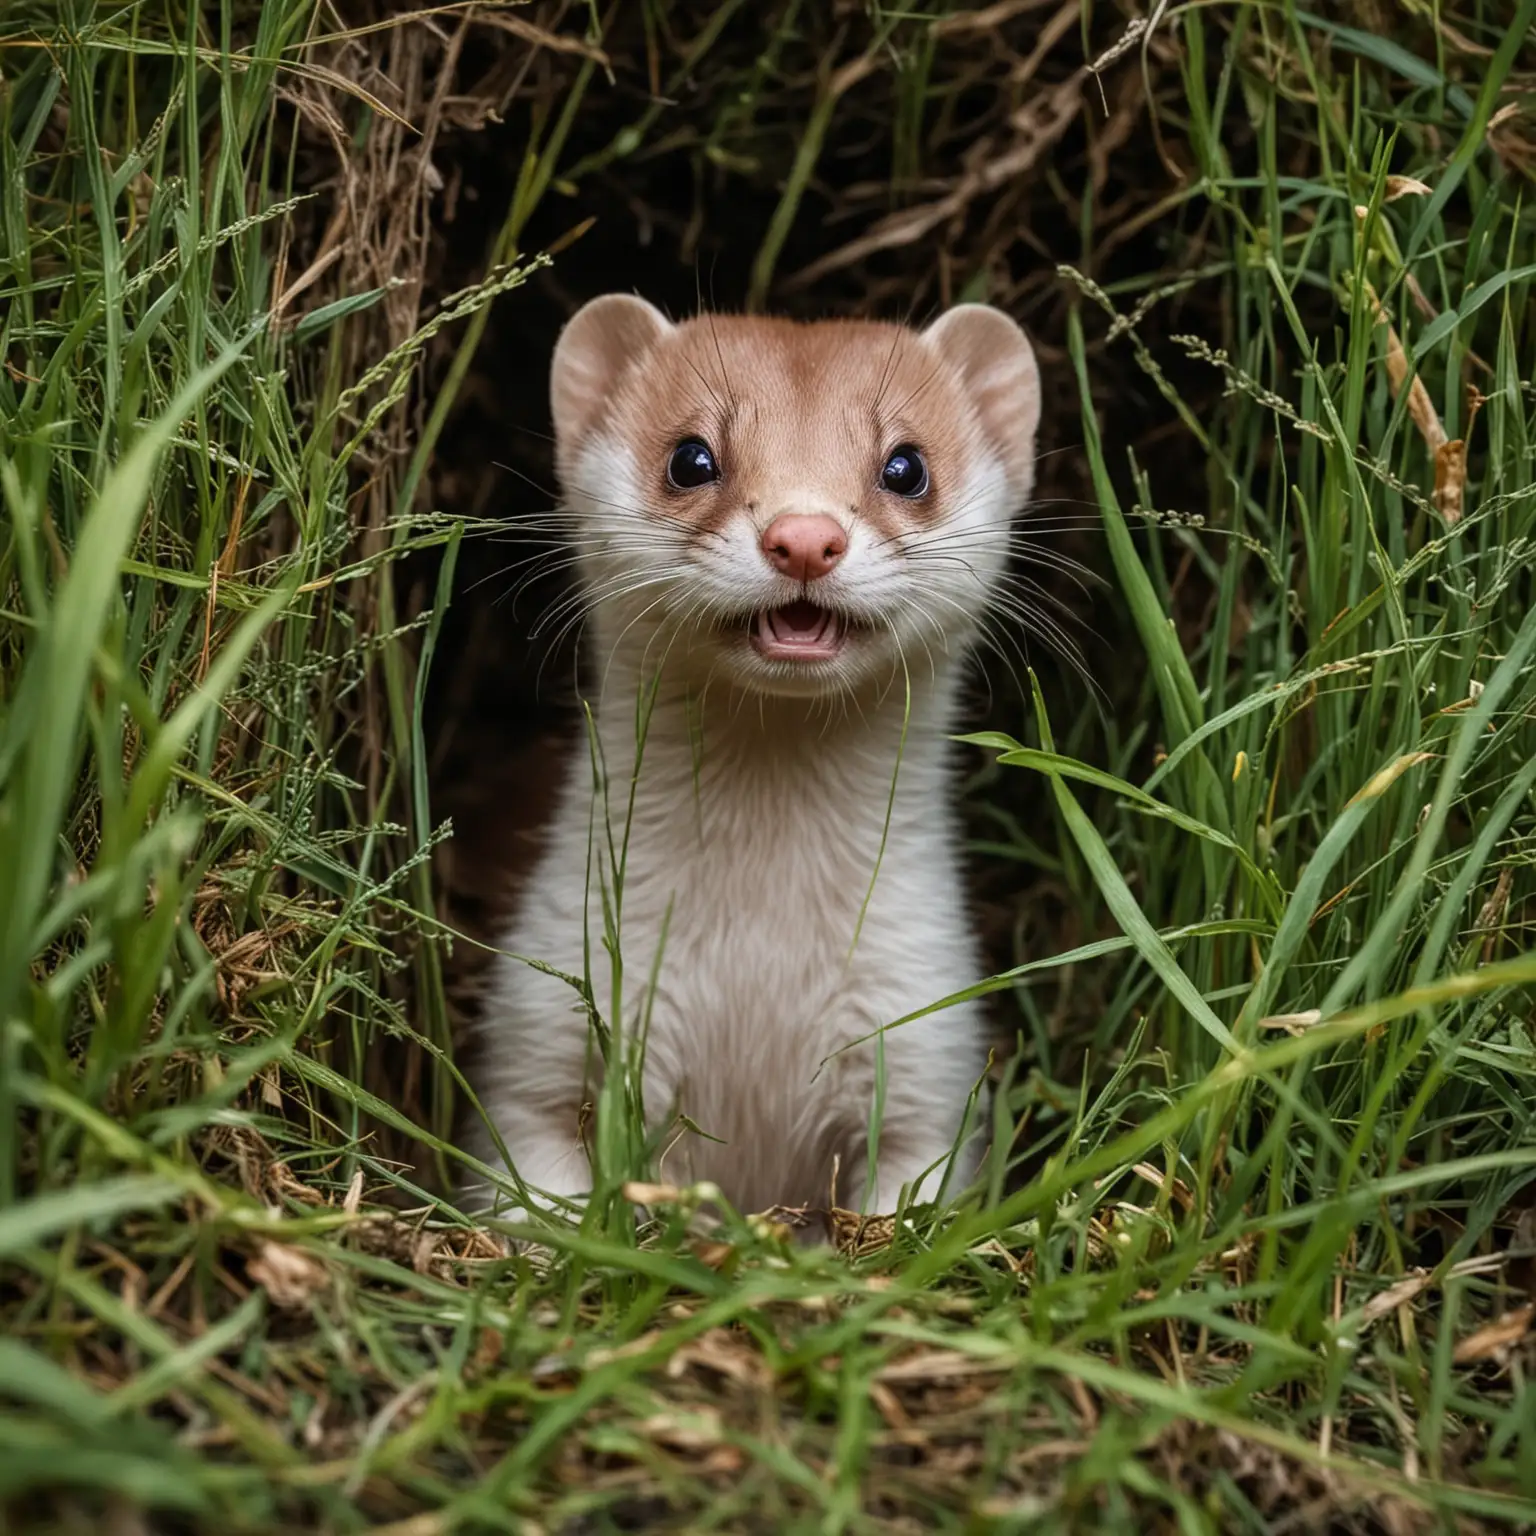 a weasel poking its head and body out of a hole in some grass in a forest